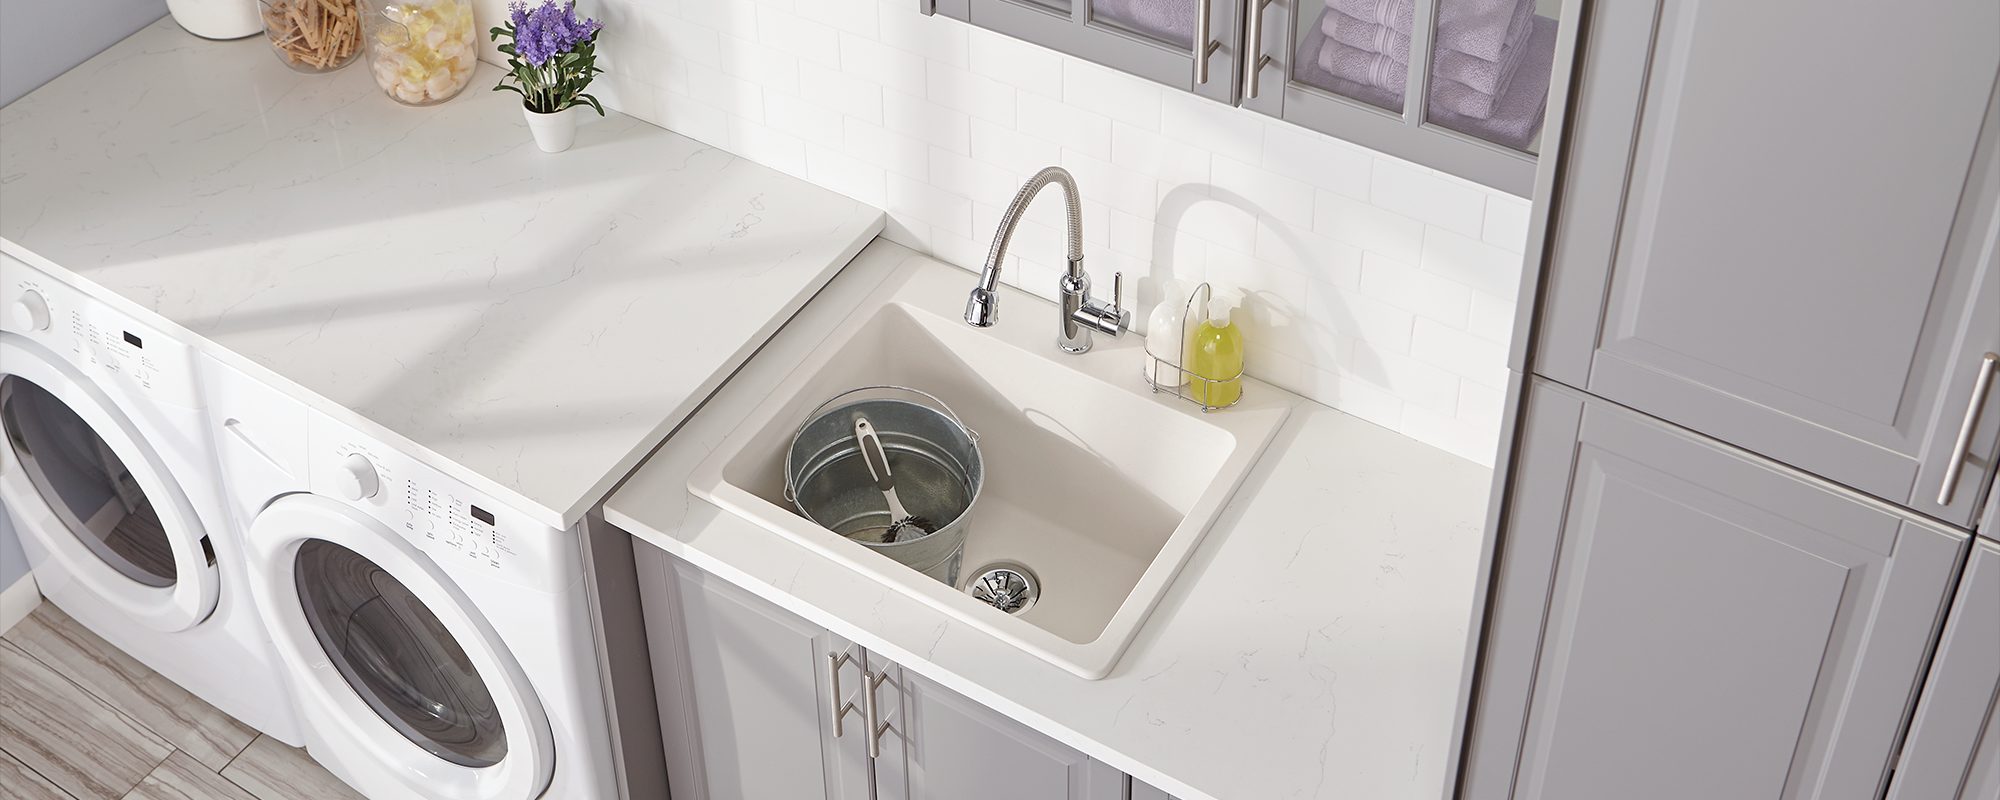 Quartz Classic Drop-in Laundry Sink with Perfect Drain, White